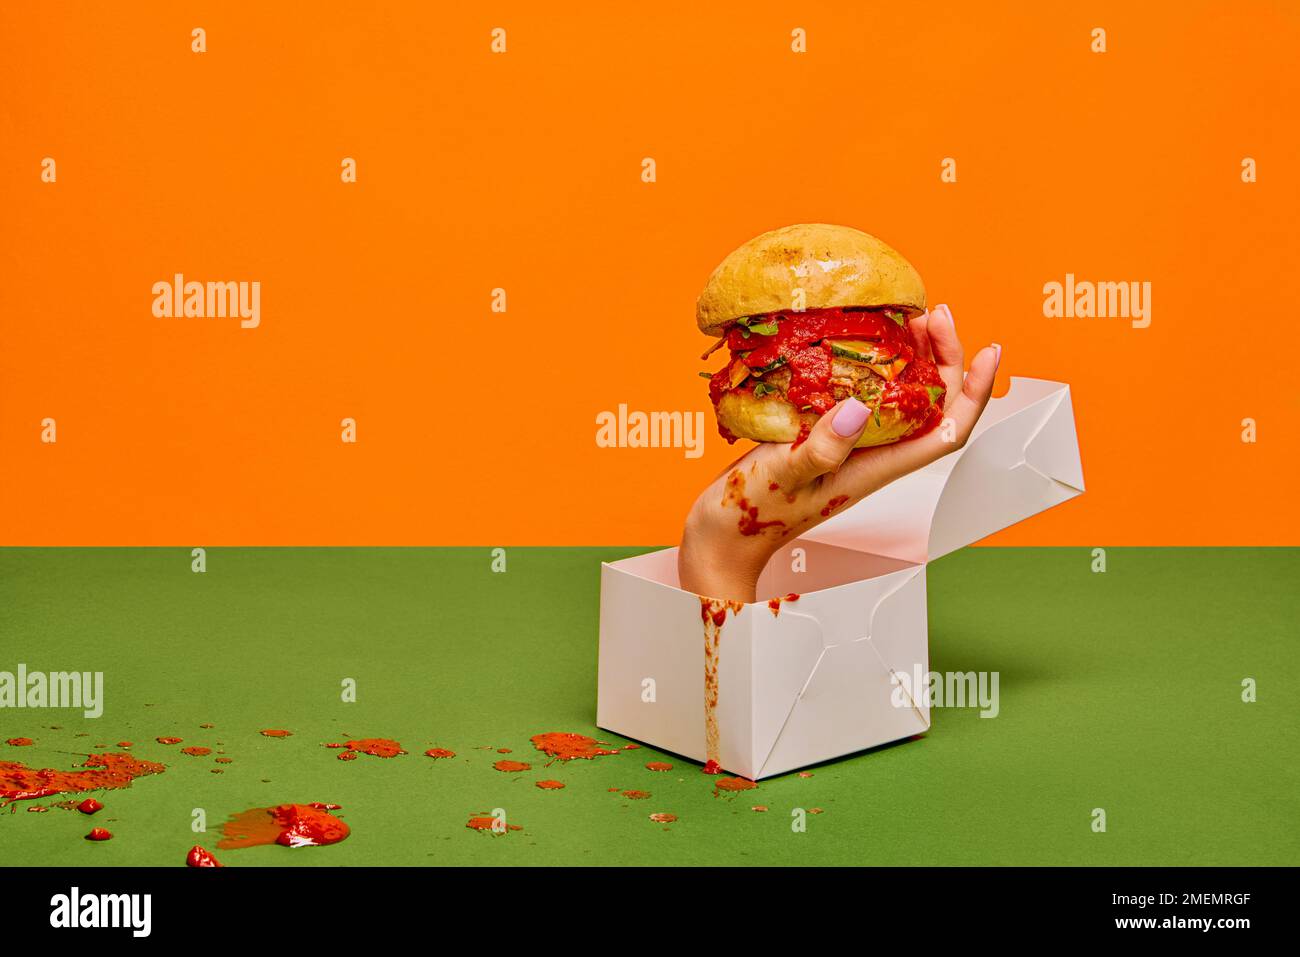 Food pop art photography. Female hand sticking out food box with burger on green tablecloth and orange background Stock Photo